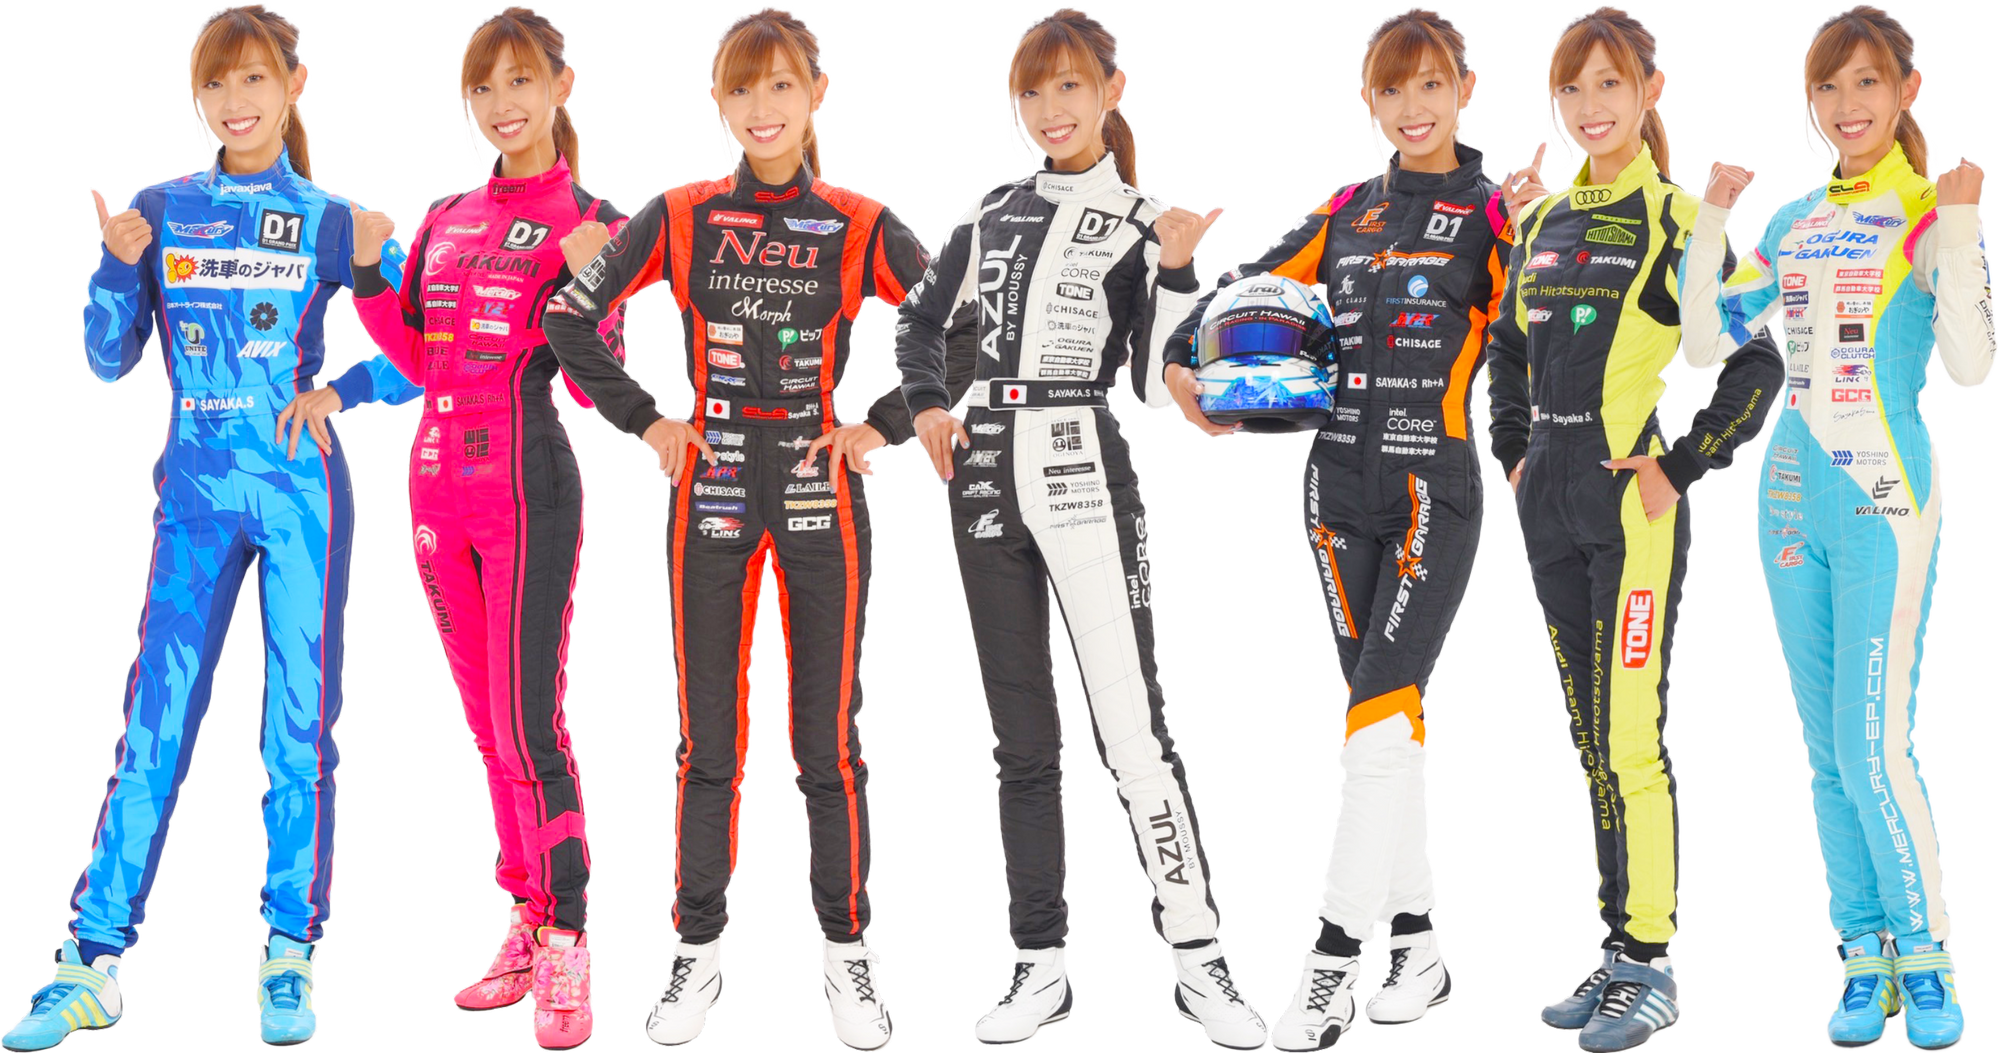 RACING SUITS